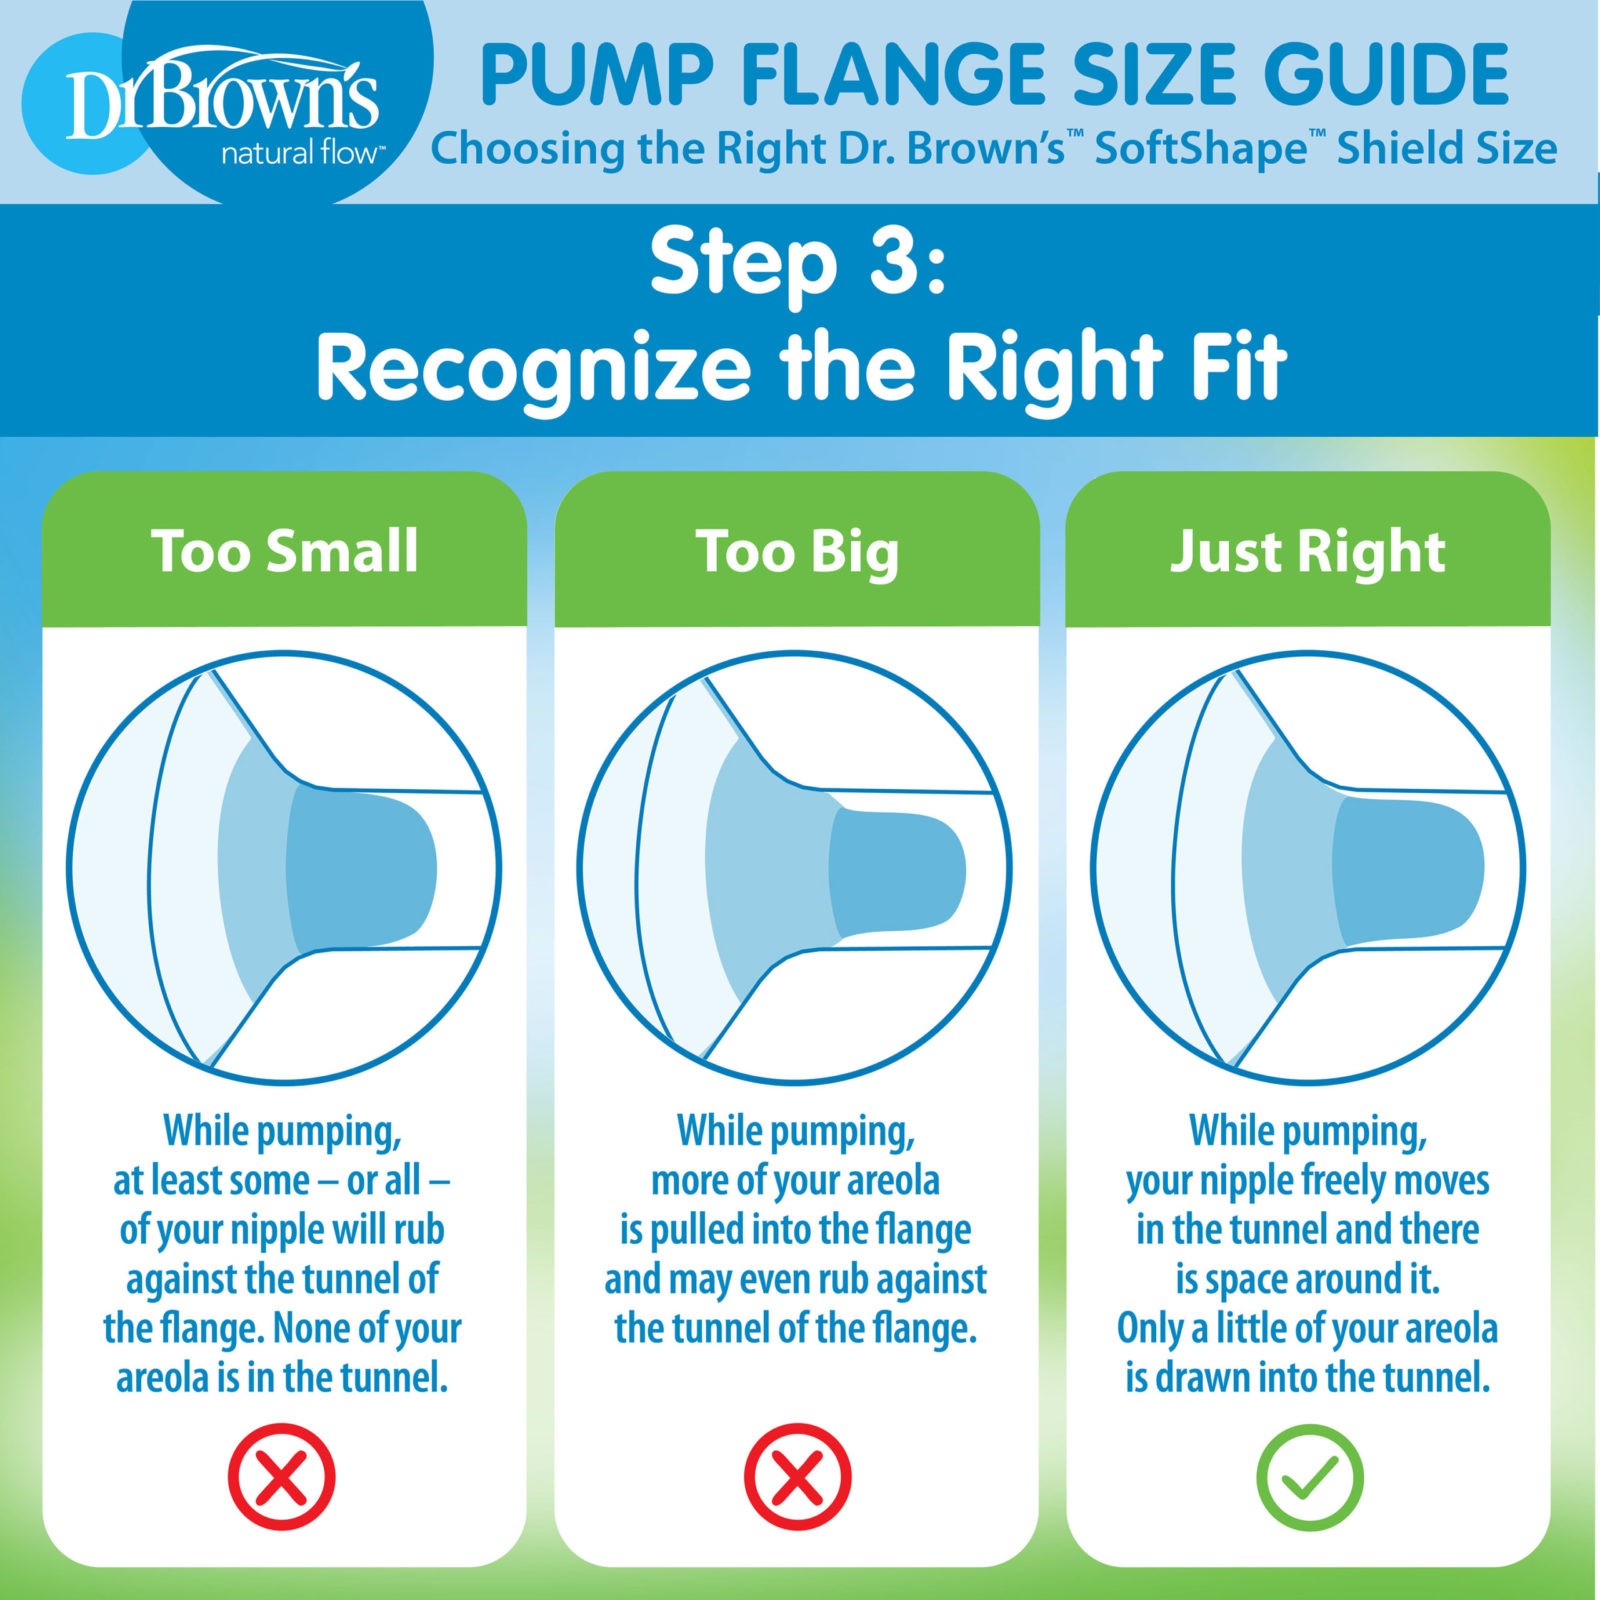 How to Tell if Your Breast Pump Flanges Fit